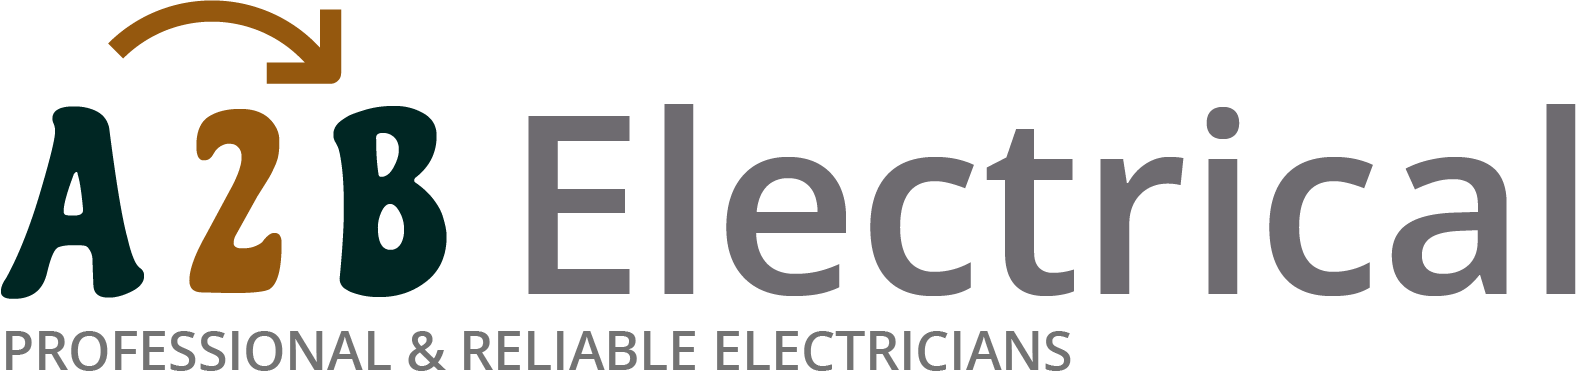 If you have electrical wiring problems in Melton Mowbray, we can provide an electrician to have a look for you. 